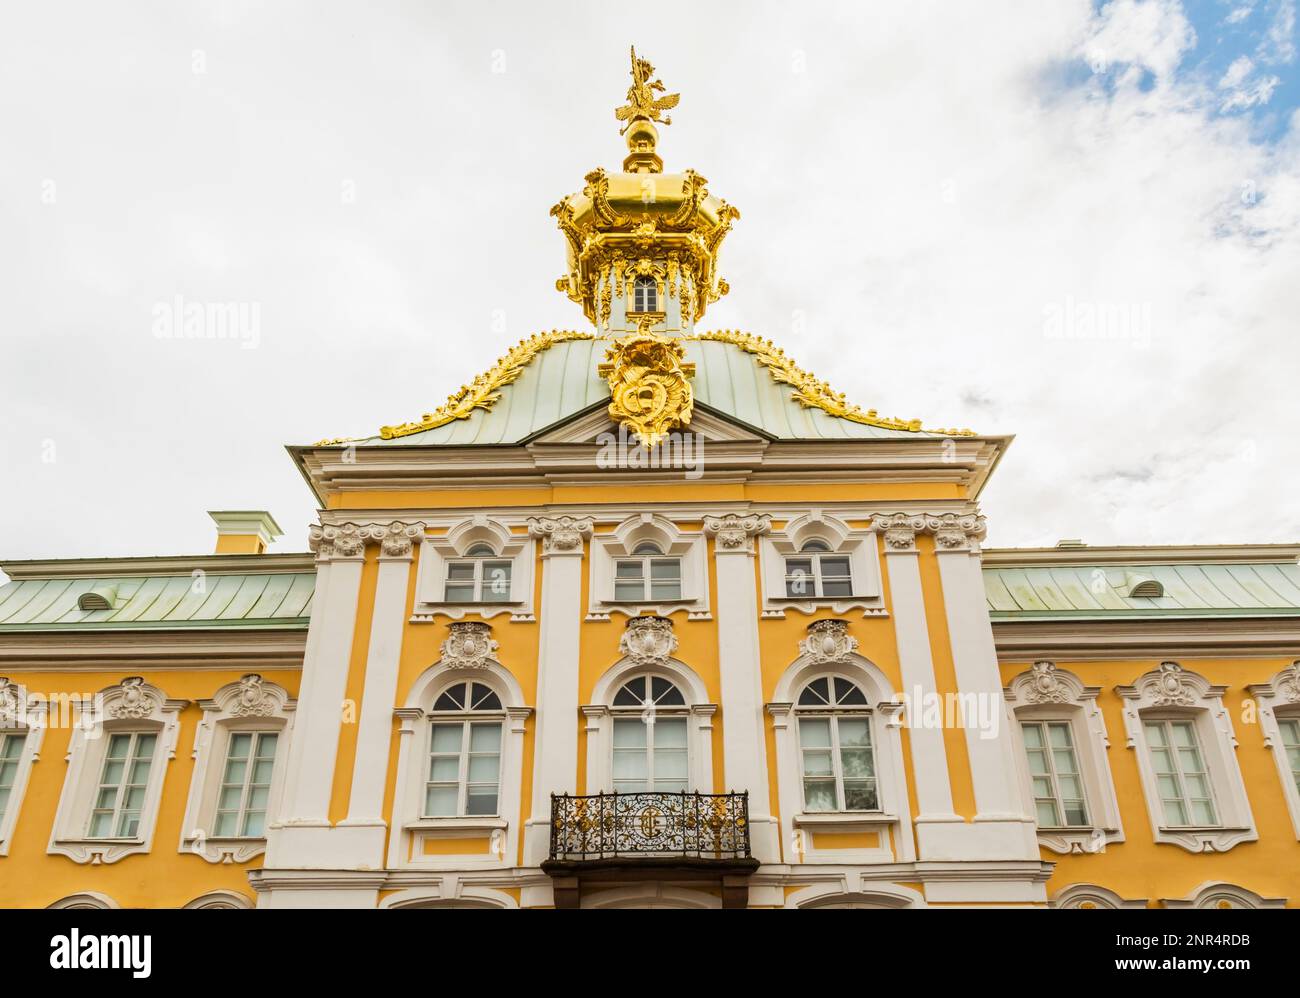 Ornate golden dome and cupola on the Peterhof Grand Palace in late summer, Petergof, Saint-Petersburg, Russia. Stock Photo